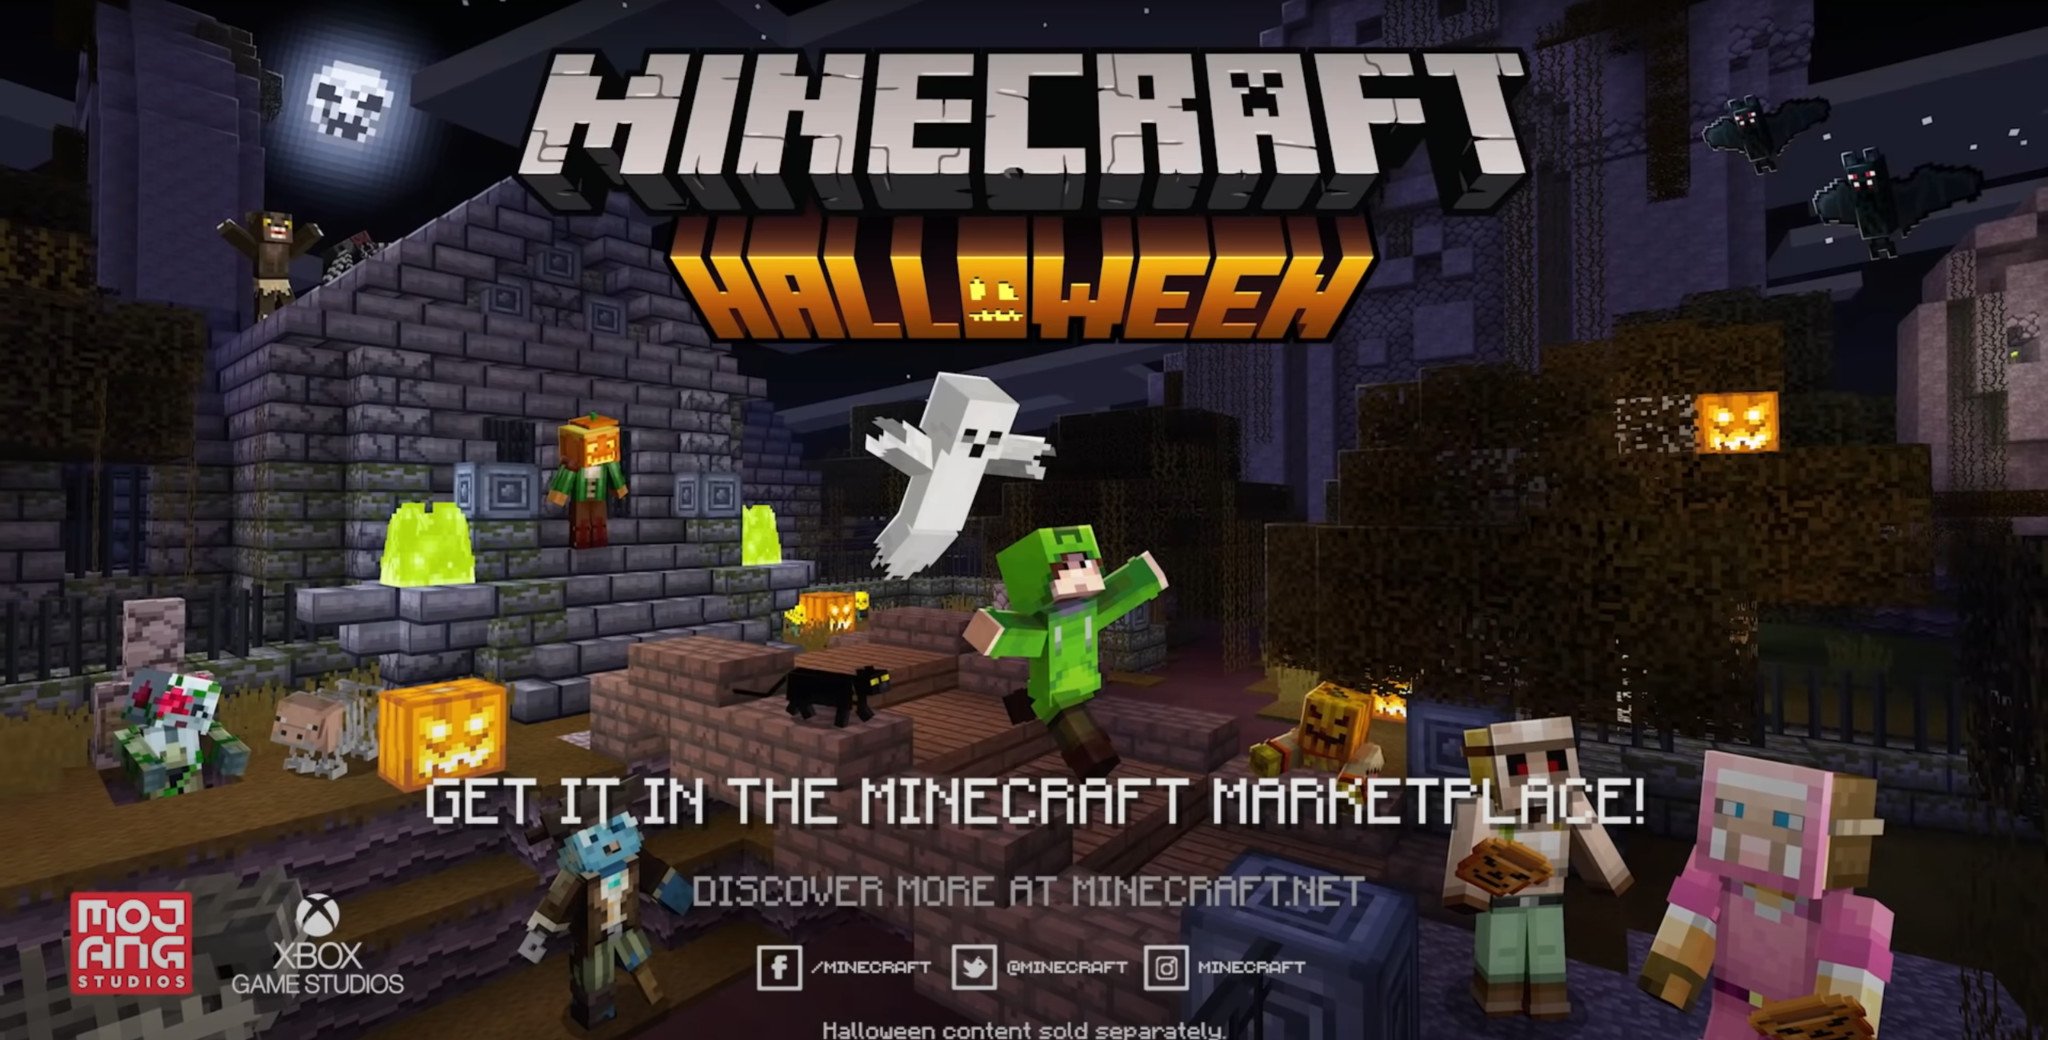 Minecraft Marketplace celebrates Halloween with new Collection, freebies available too  Windows 